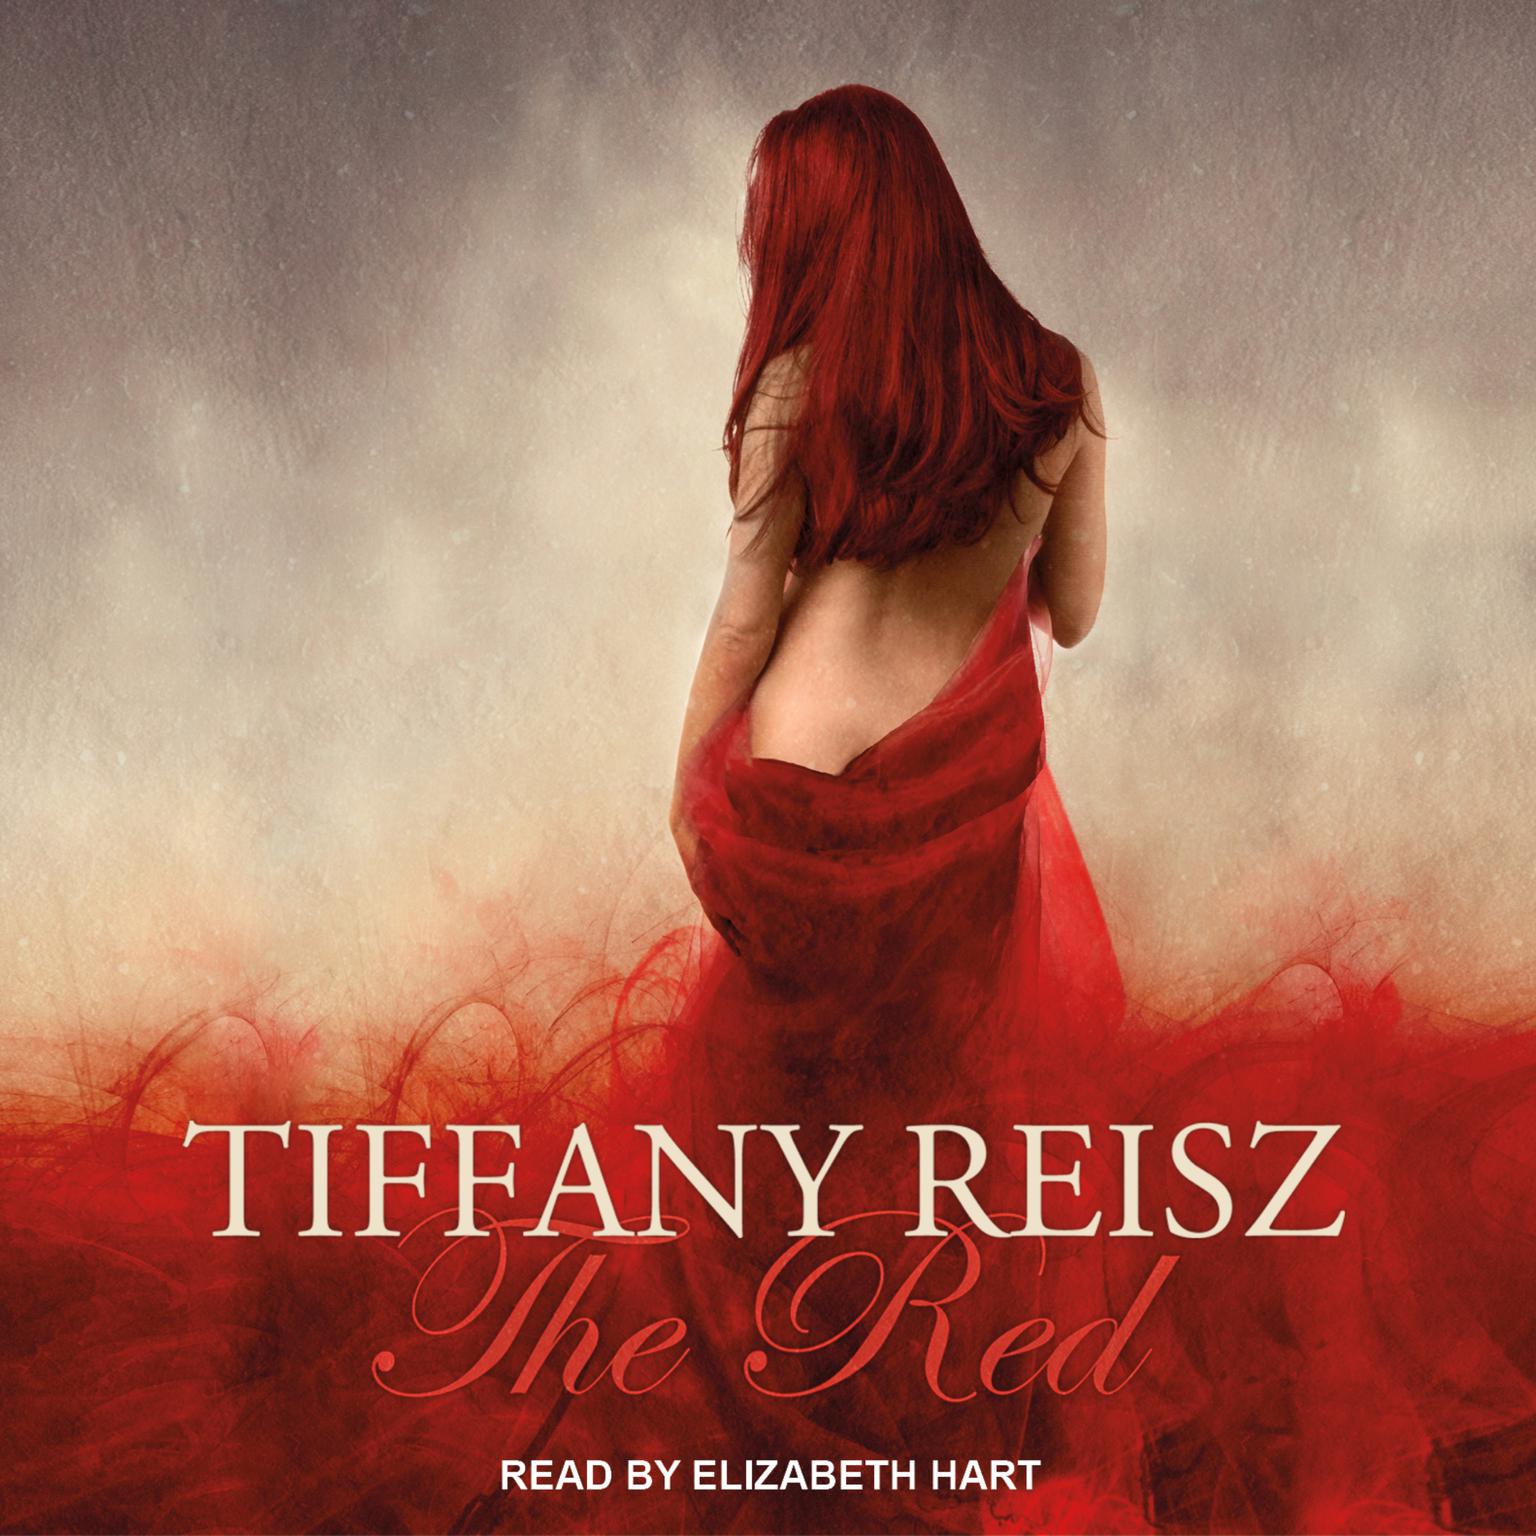 The Red: An Erotic Fantasy Audiobook, by Tiffany Reisz